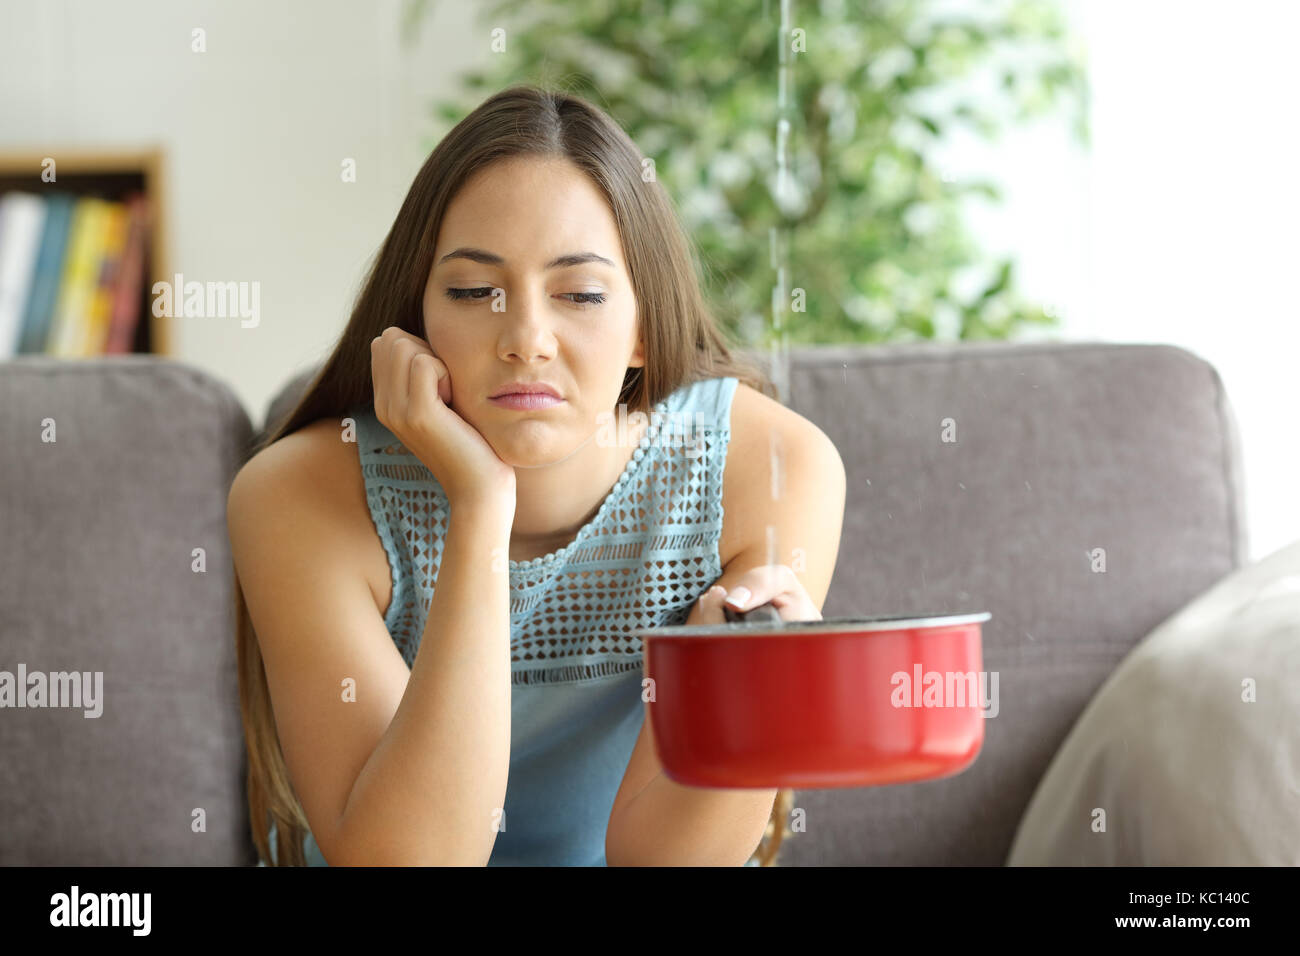 Frustrated homeowner watching ceiling leaks sitting on a couch at home Stock Photo